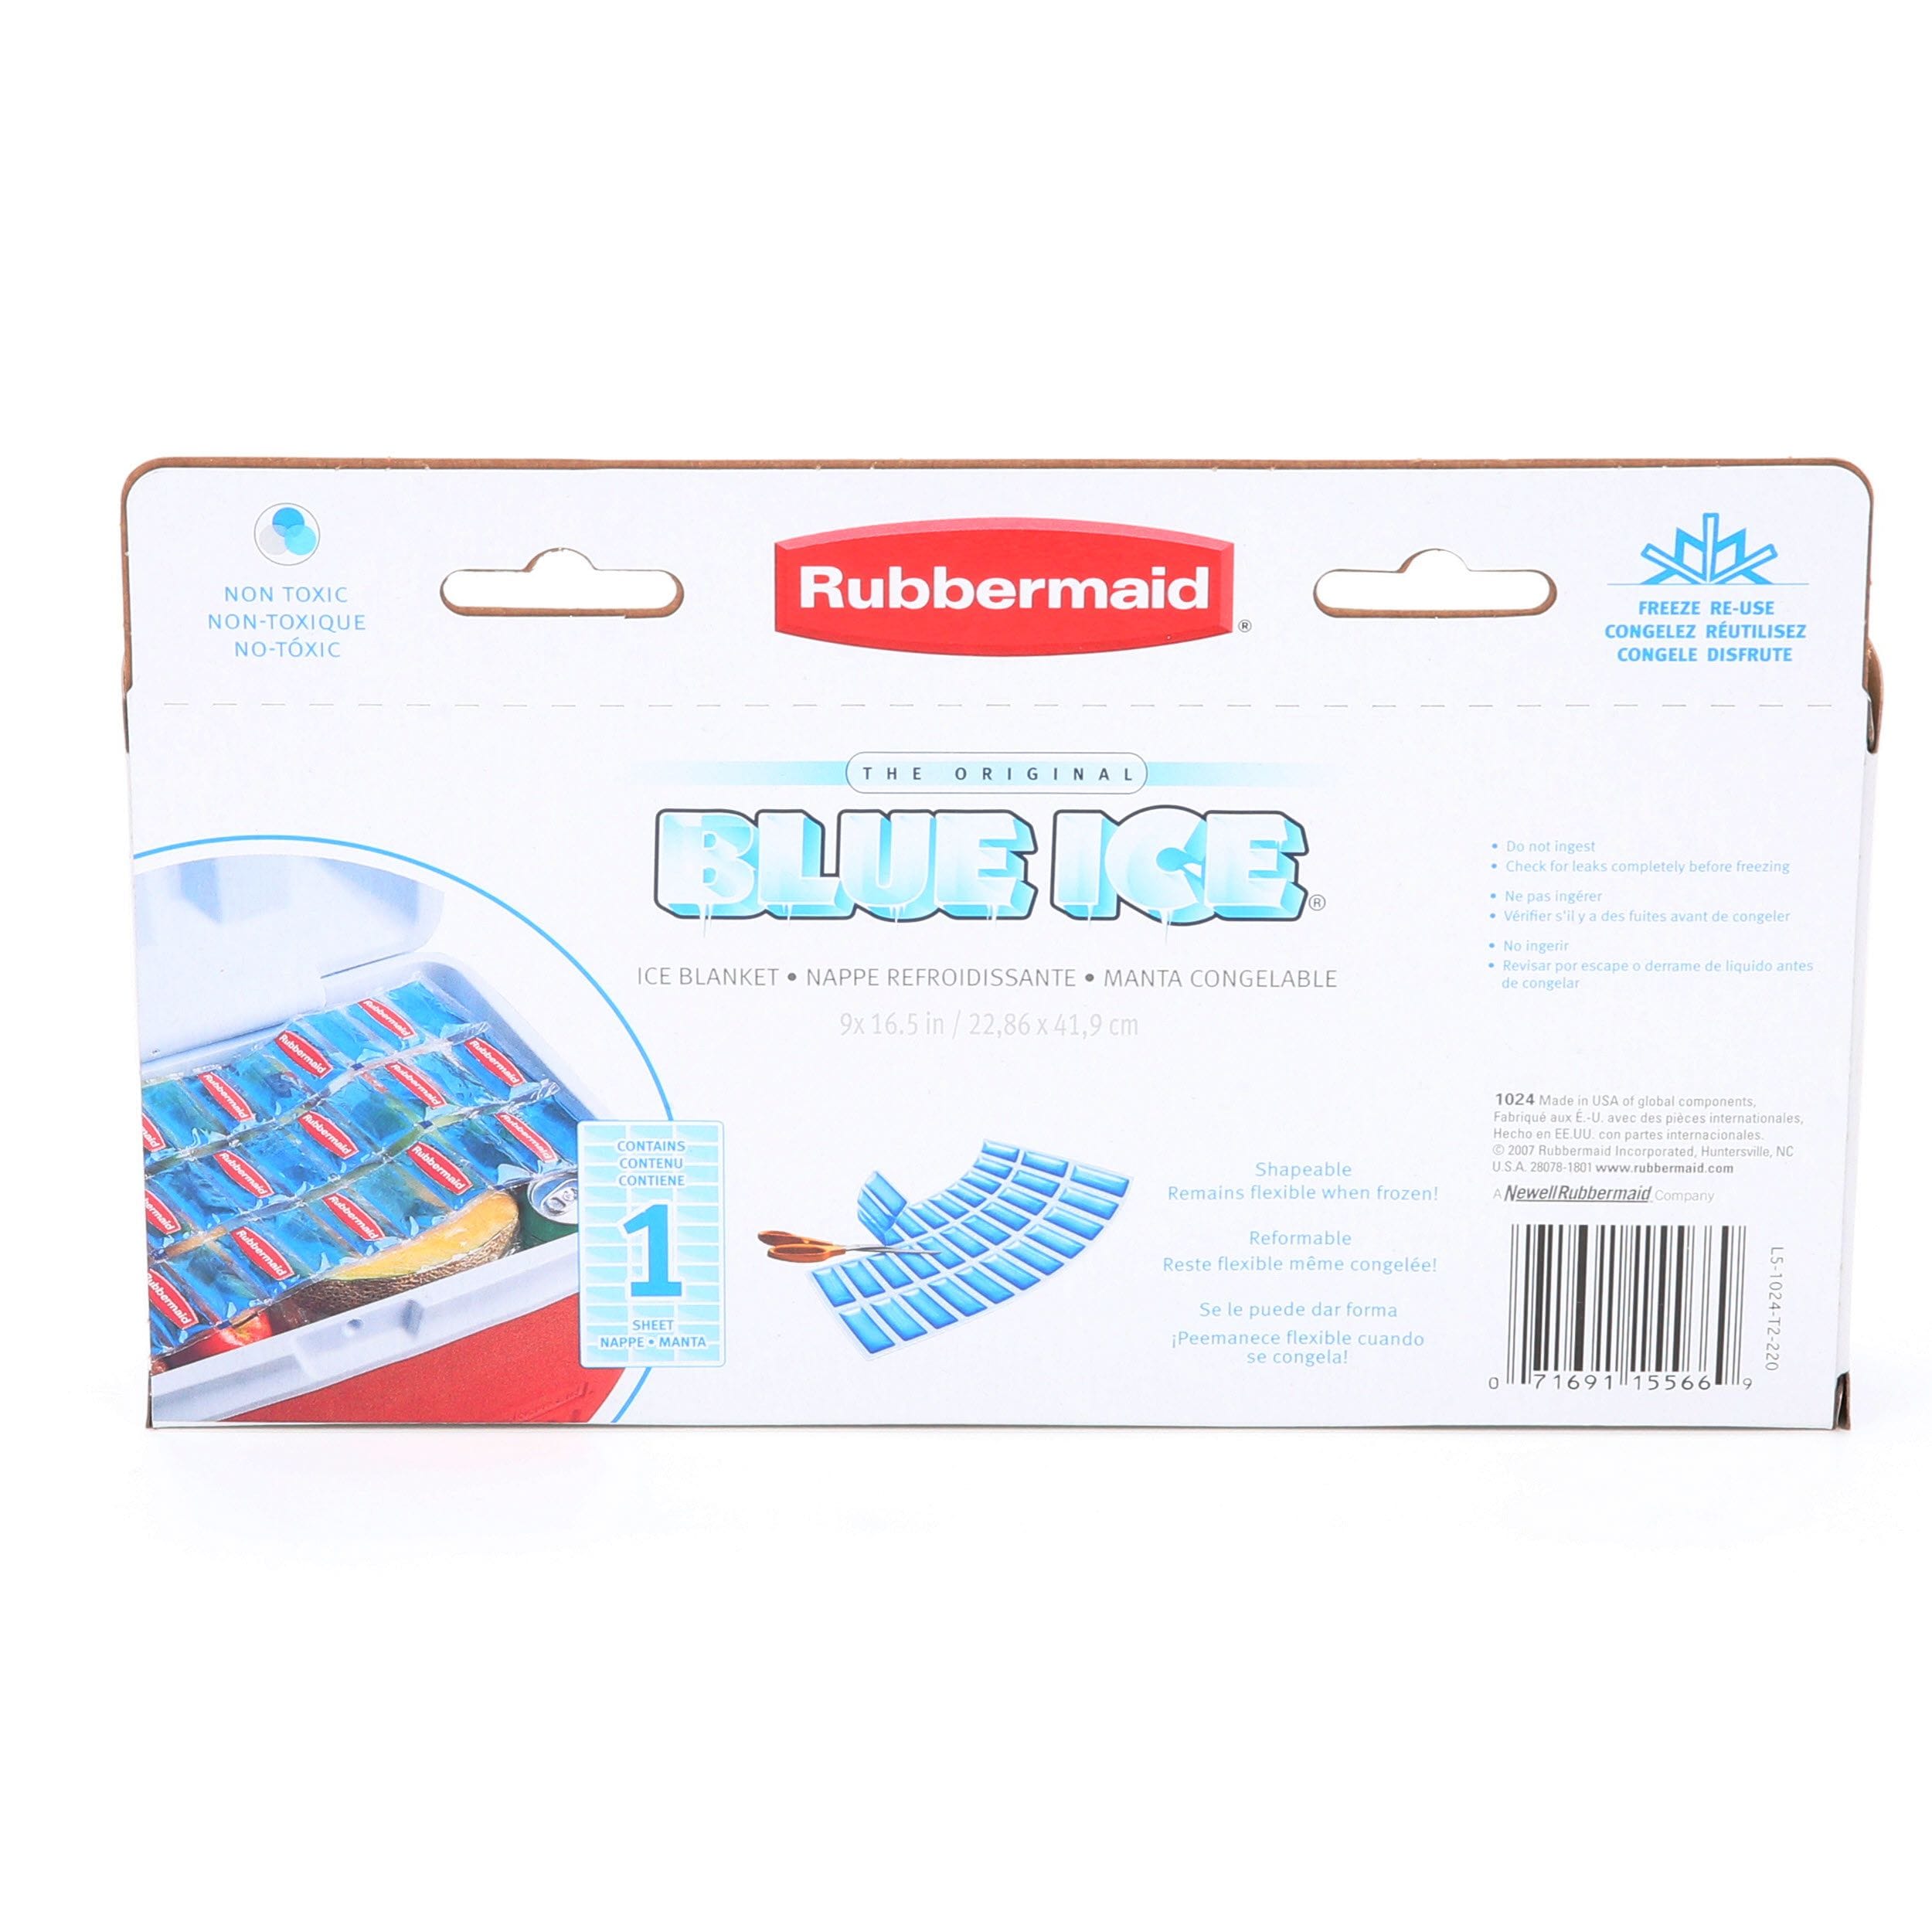 units QTY 5 Rubbermaid 1080-16-220 Blue Ice Block Ice Pack Rubbermaid Lot 